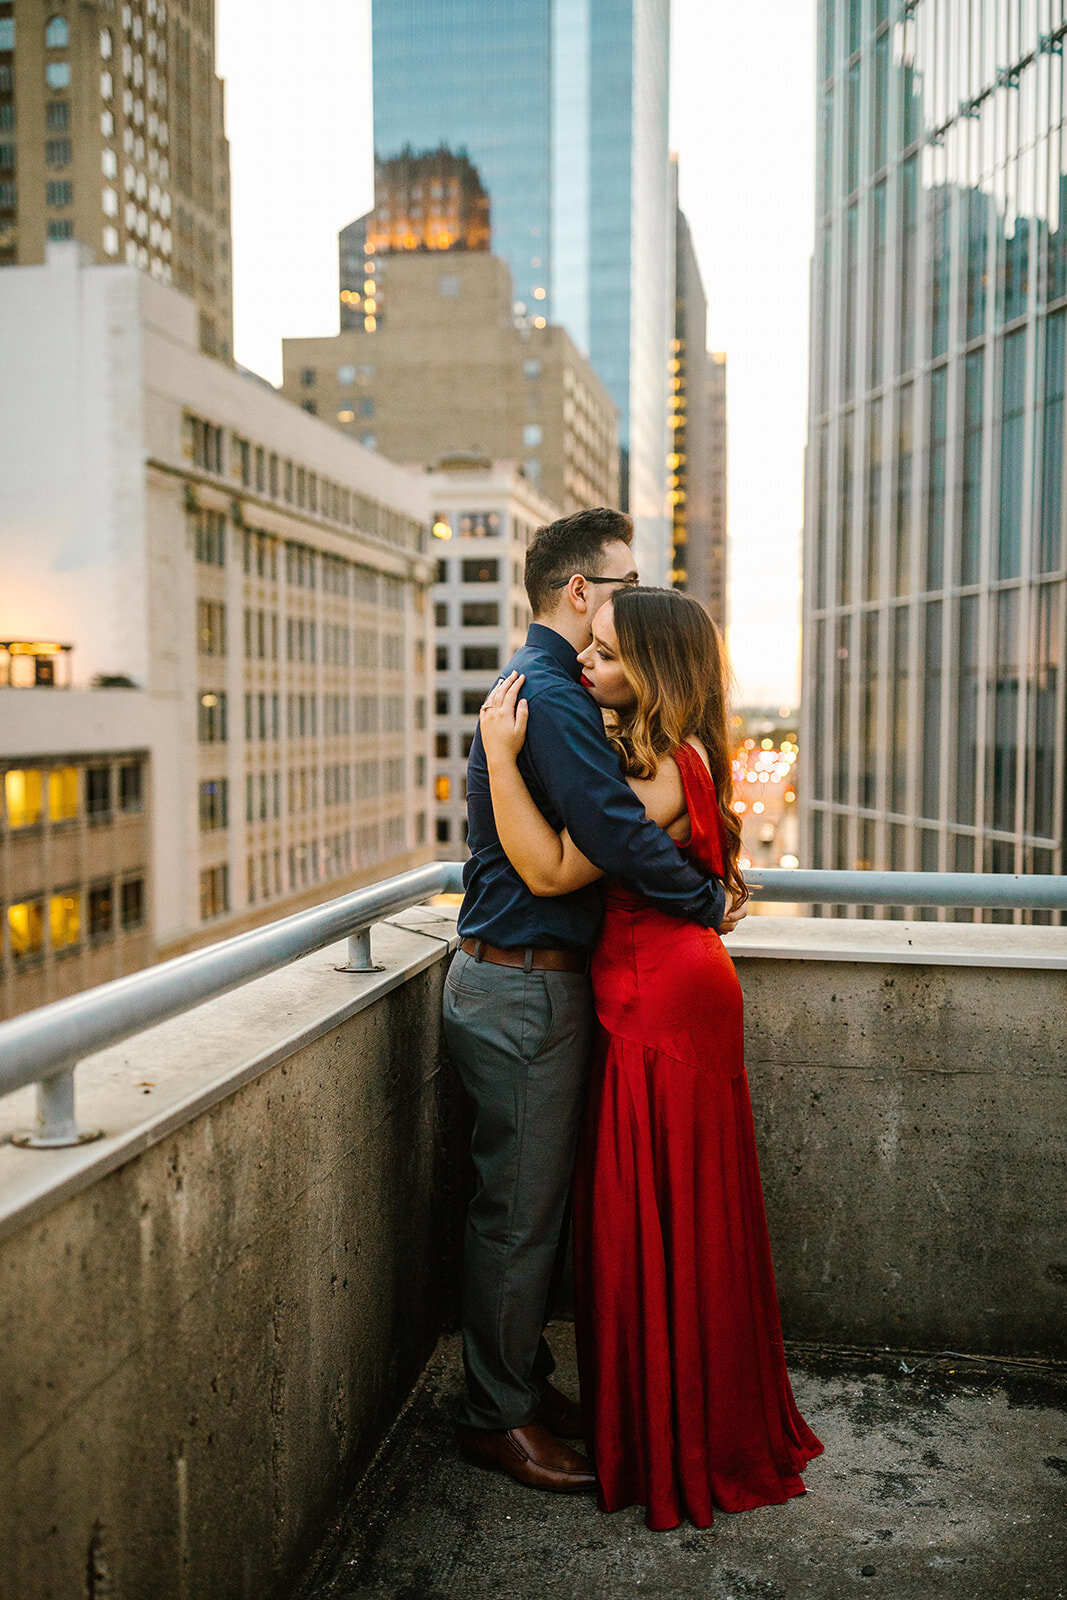 Kori+Tommy_Memorial Park and Downtown Houston Engagements_41